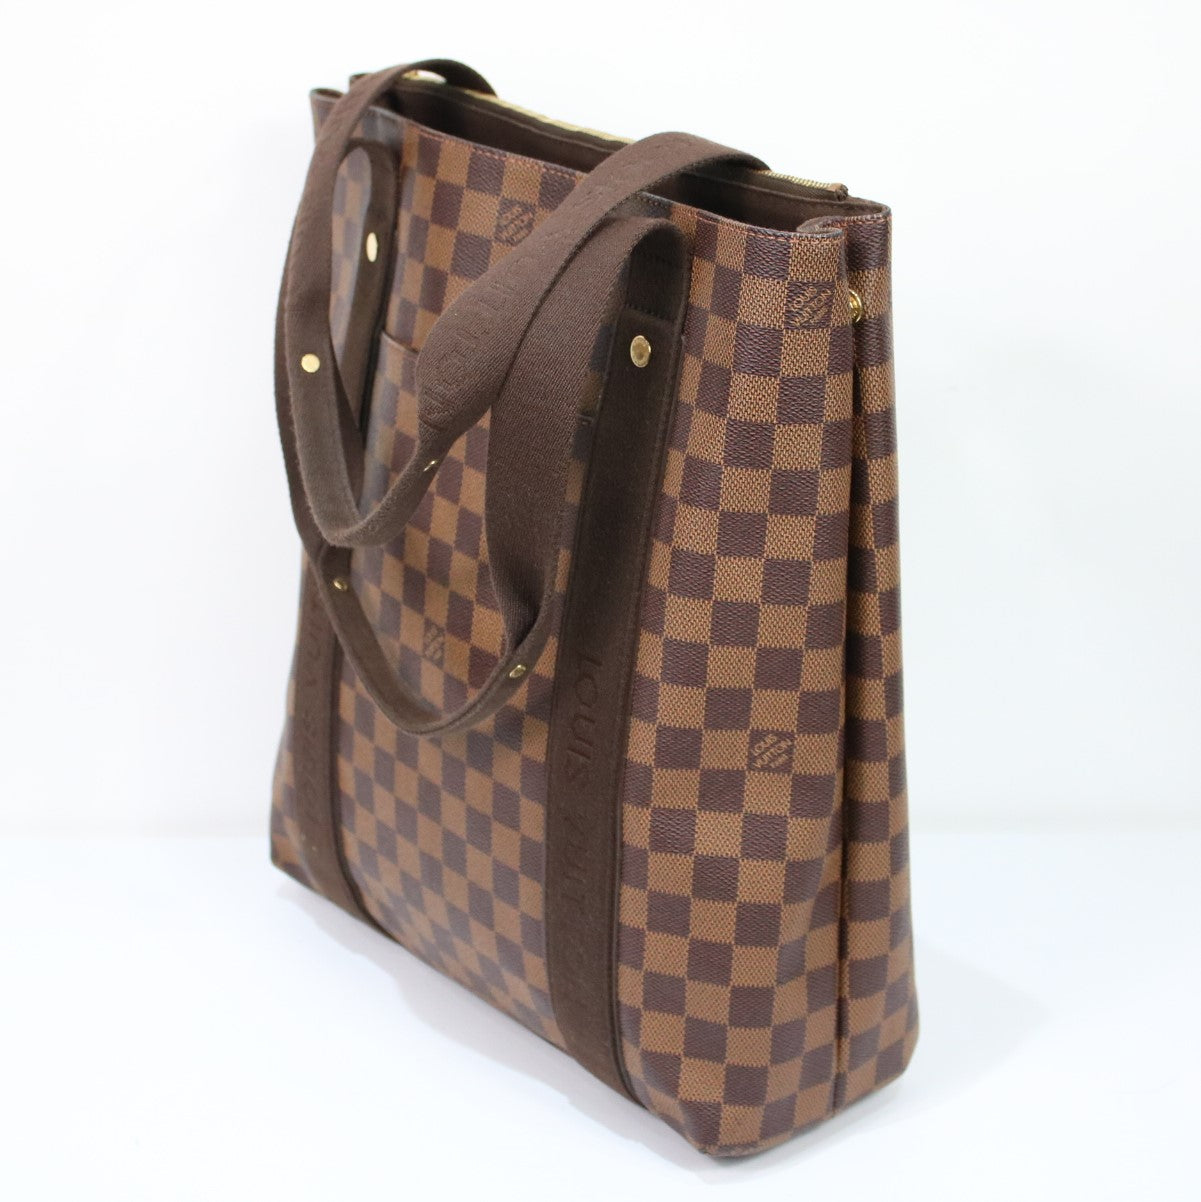 Louis Vuitton / ルイヴィトン | N52006 ダミエ カバ ボブール トート バッグ |